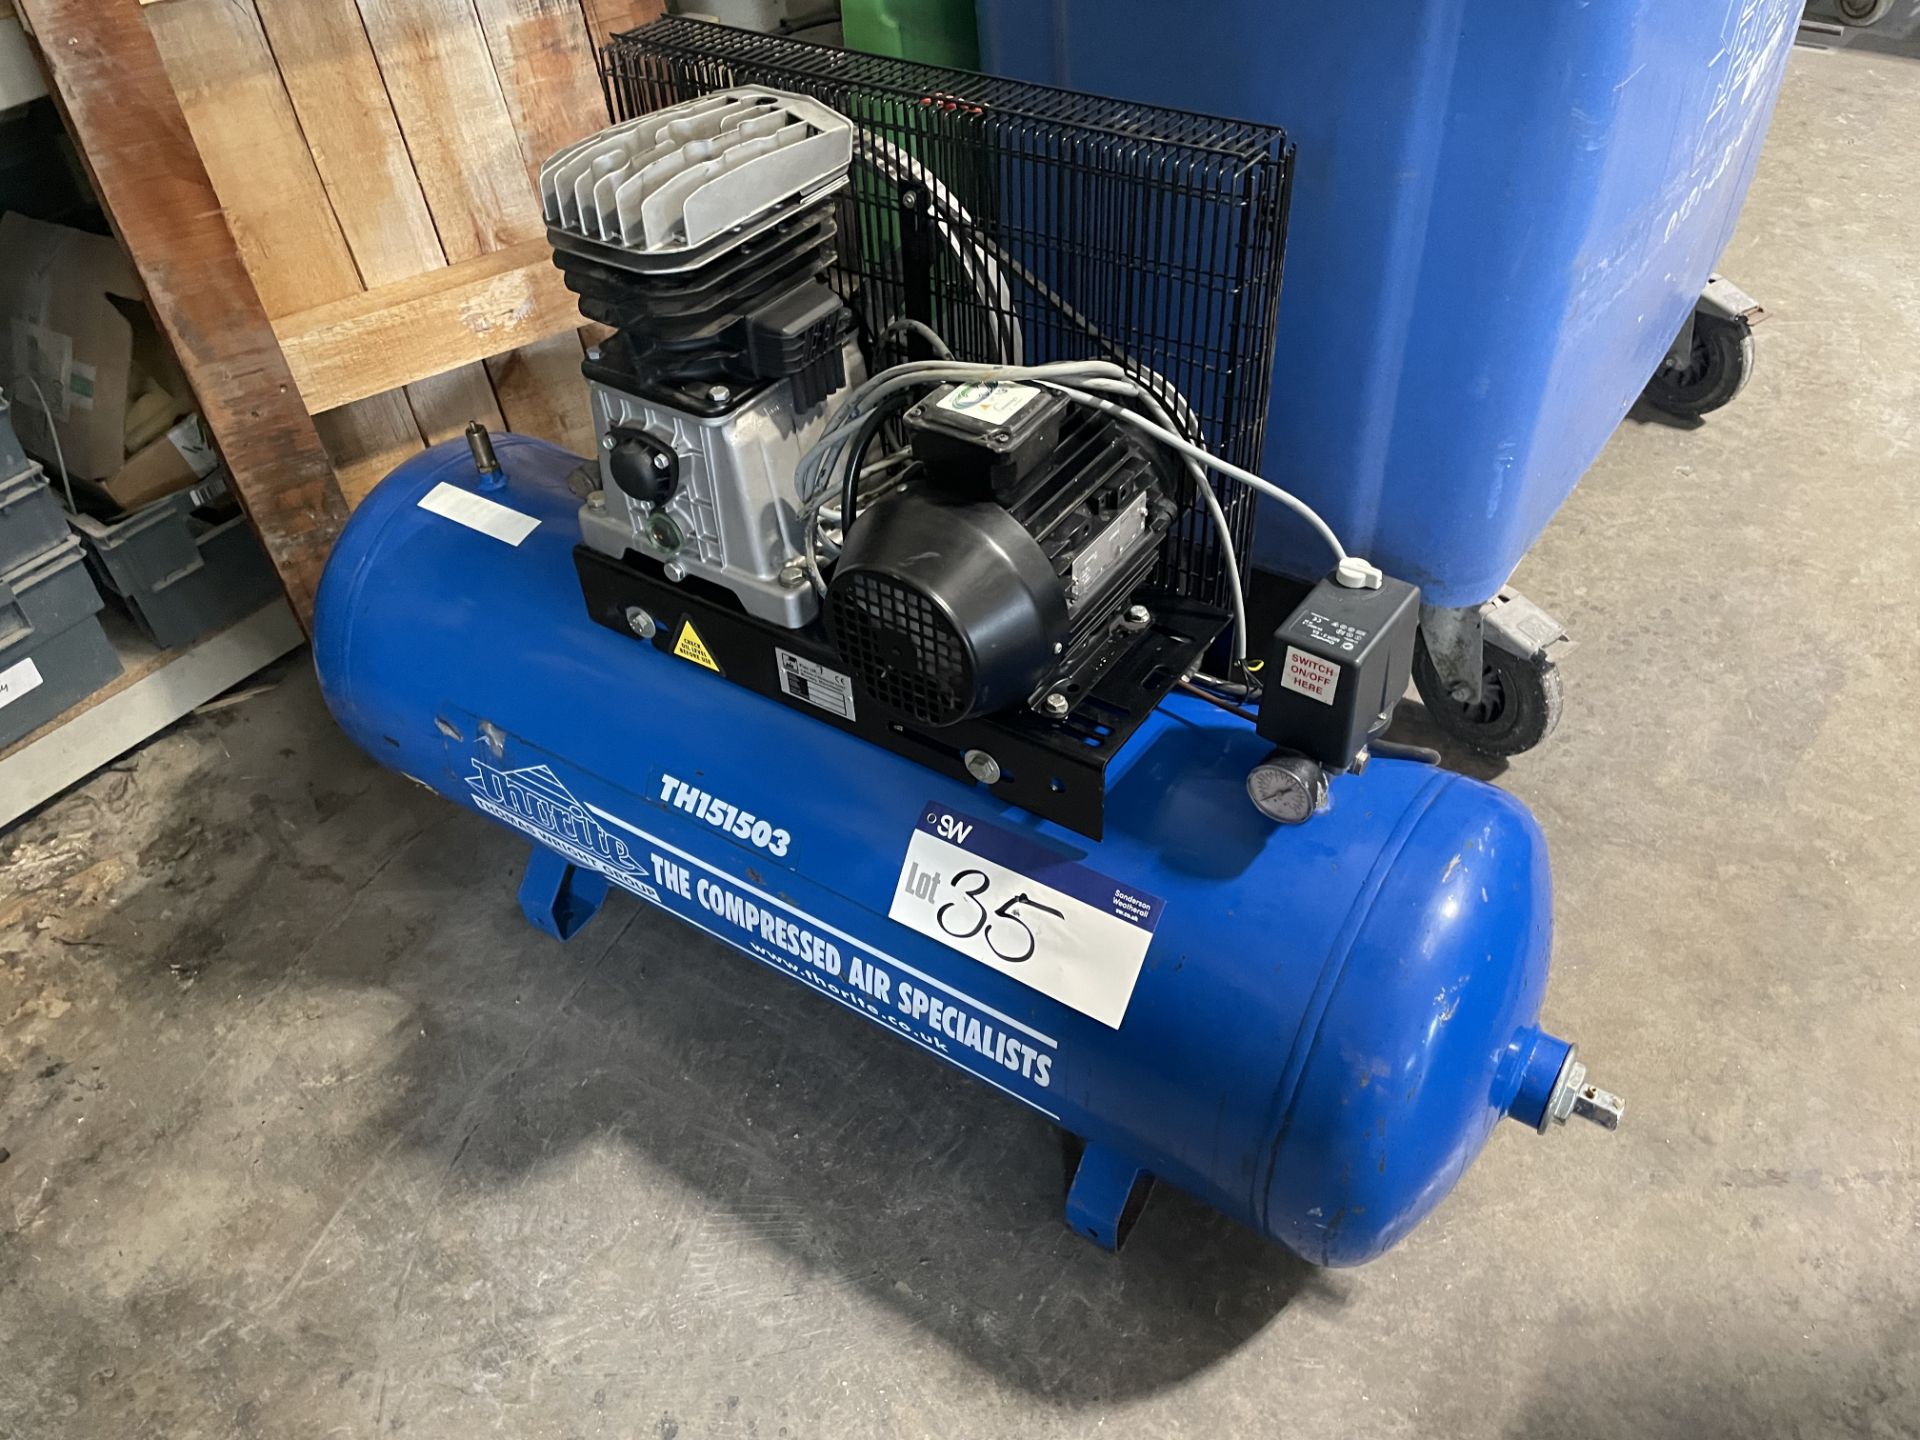 Thorite TH151503 10 bar Air Compressor, 3Hp, 10cfm, with 150 ltr receiver, 415V, 3 phasePlease